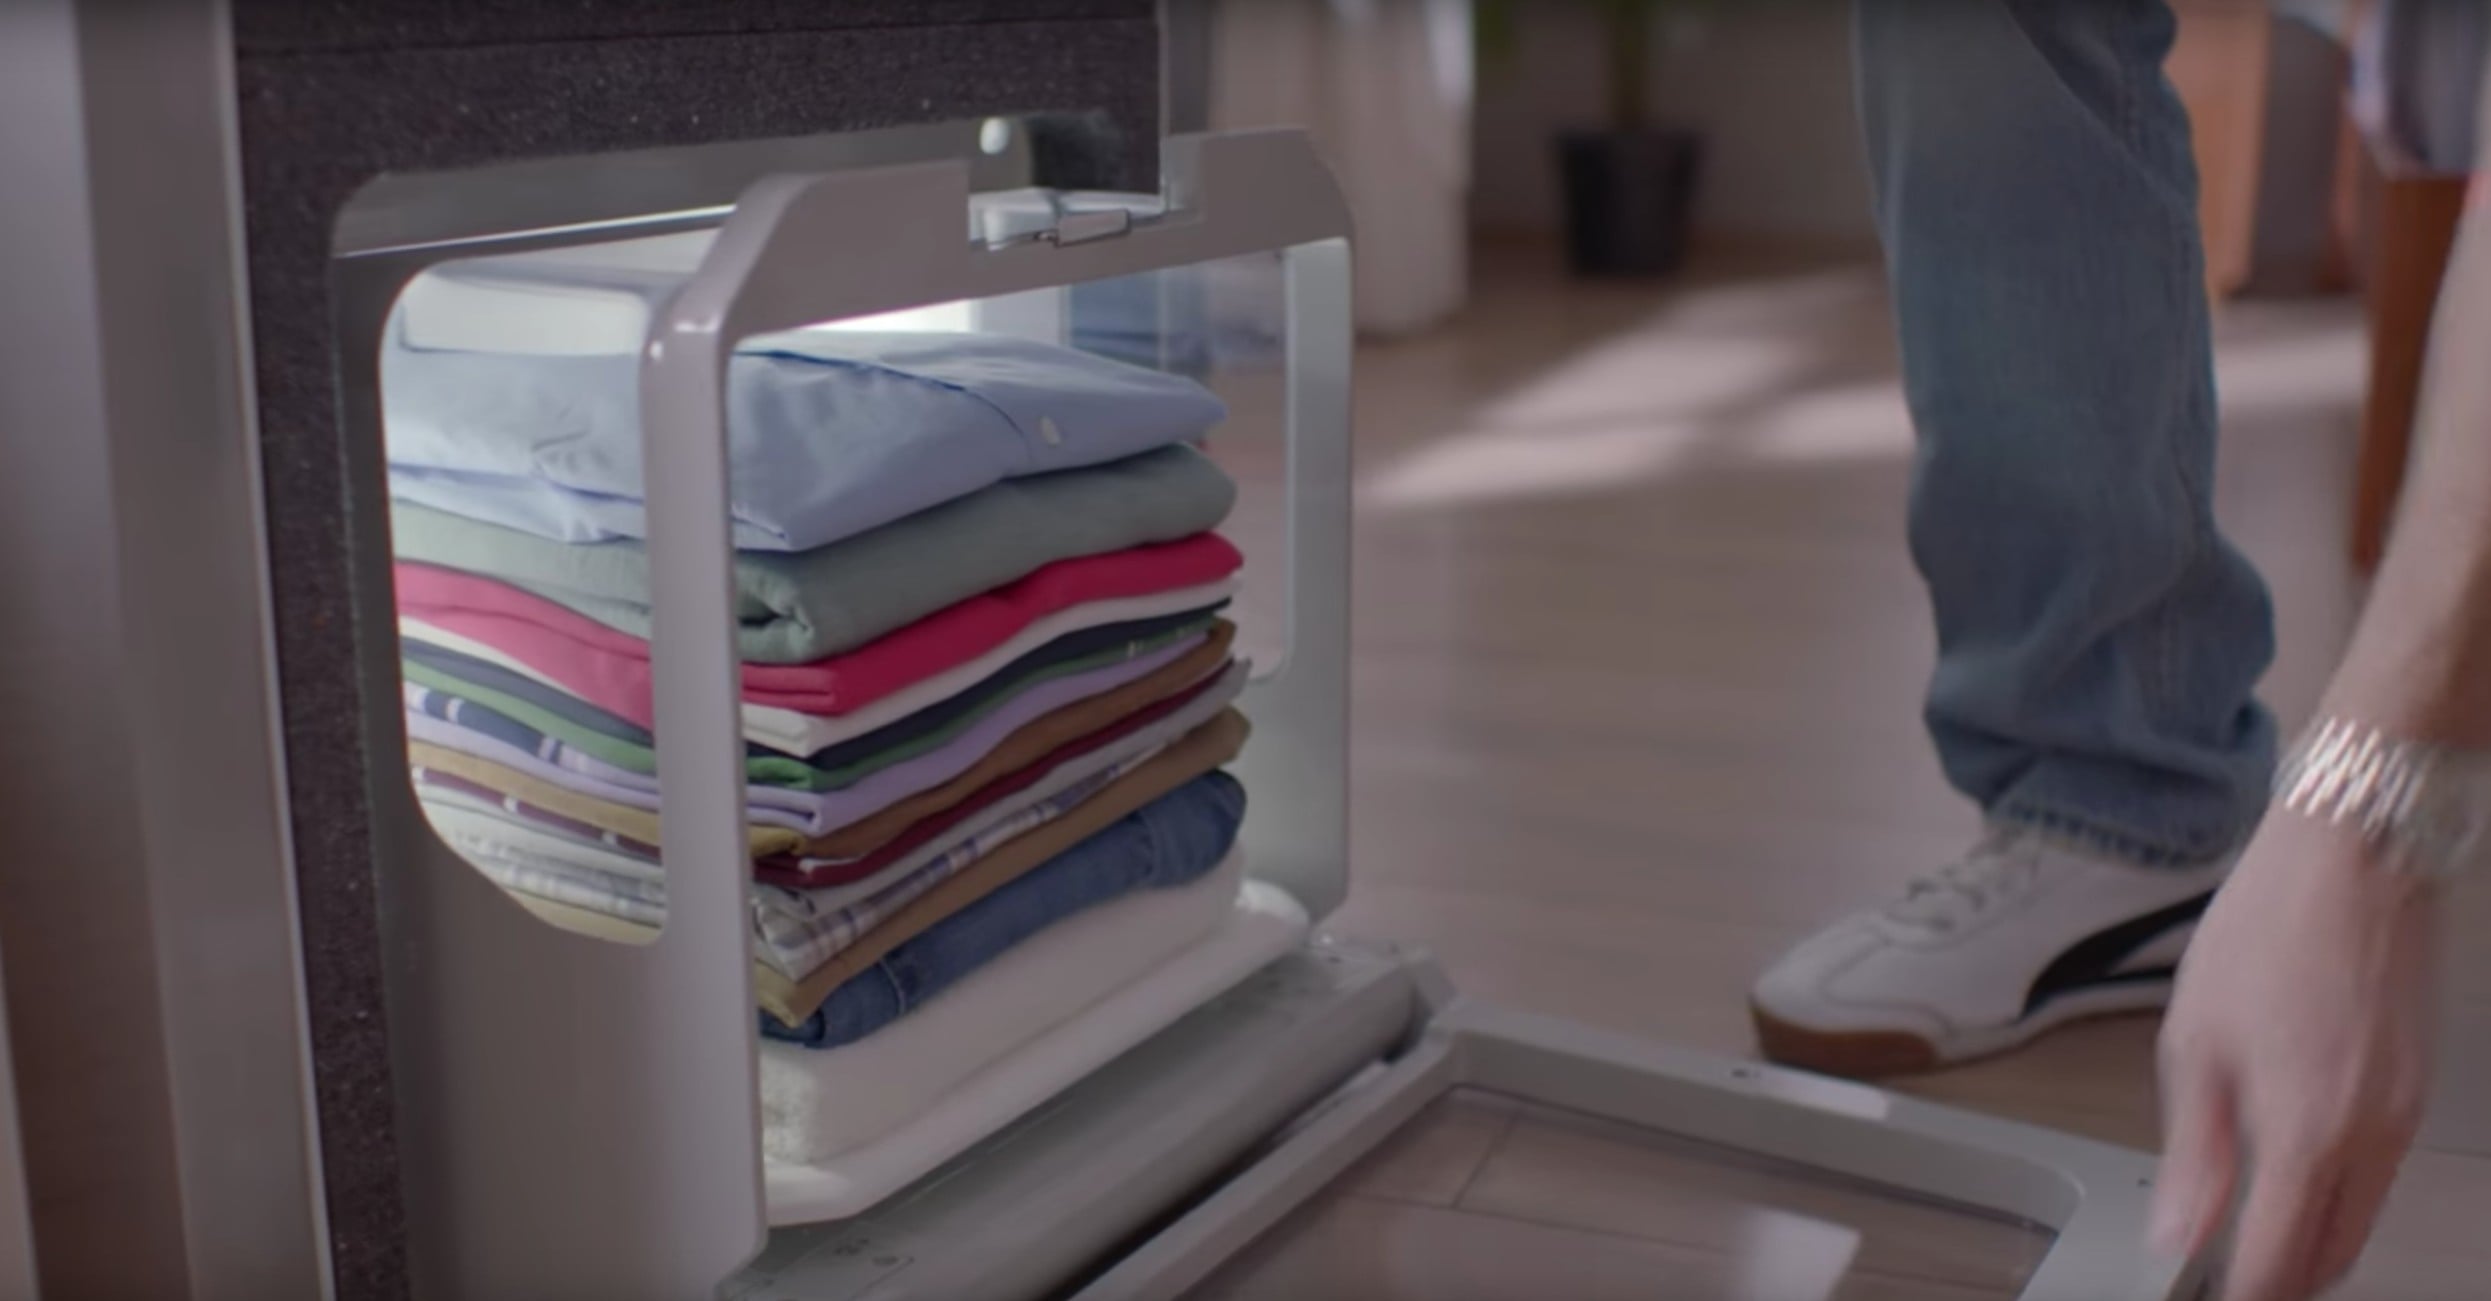 CES 2019: New 'Foldimate' robot will fold up your clothes